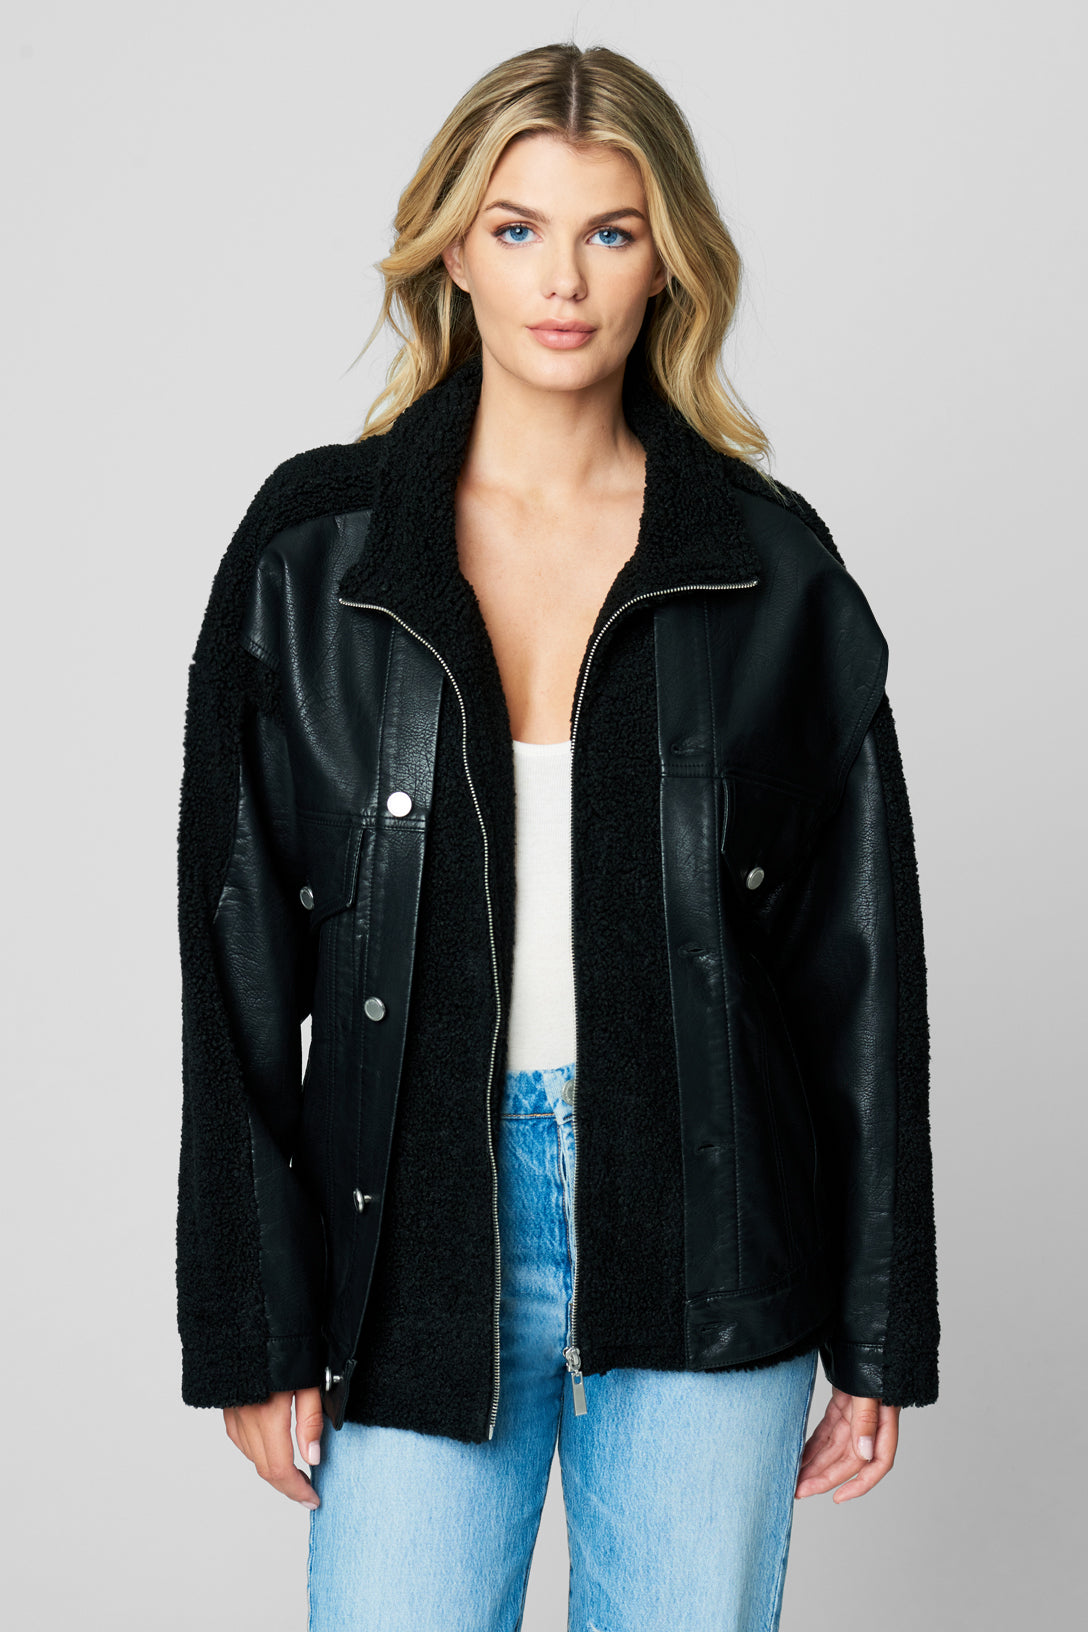 The back of this "Hannah" black leather jacket from Wink